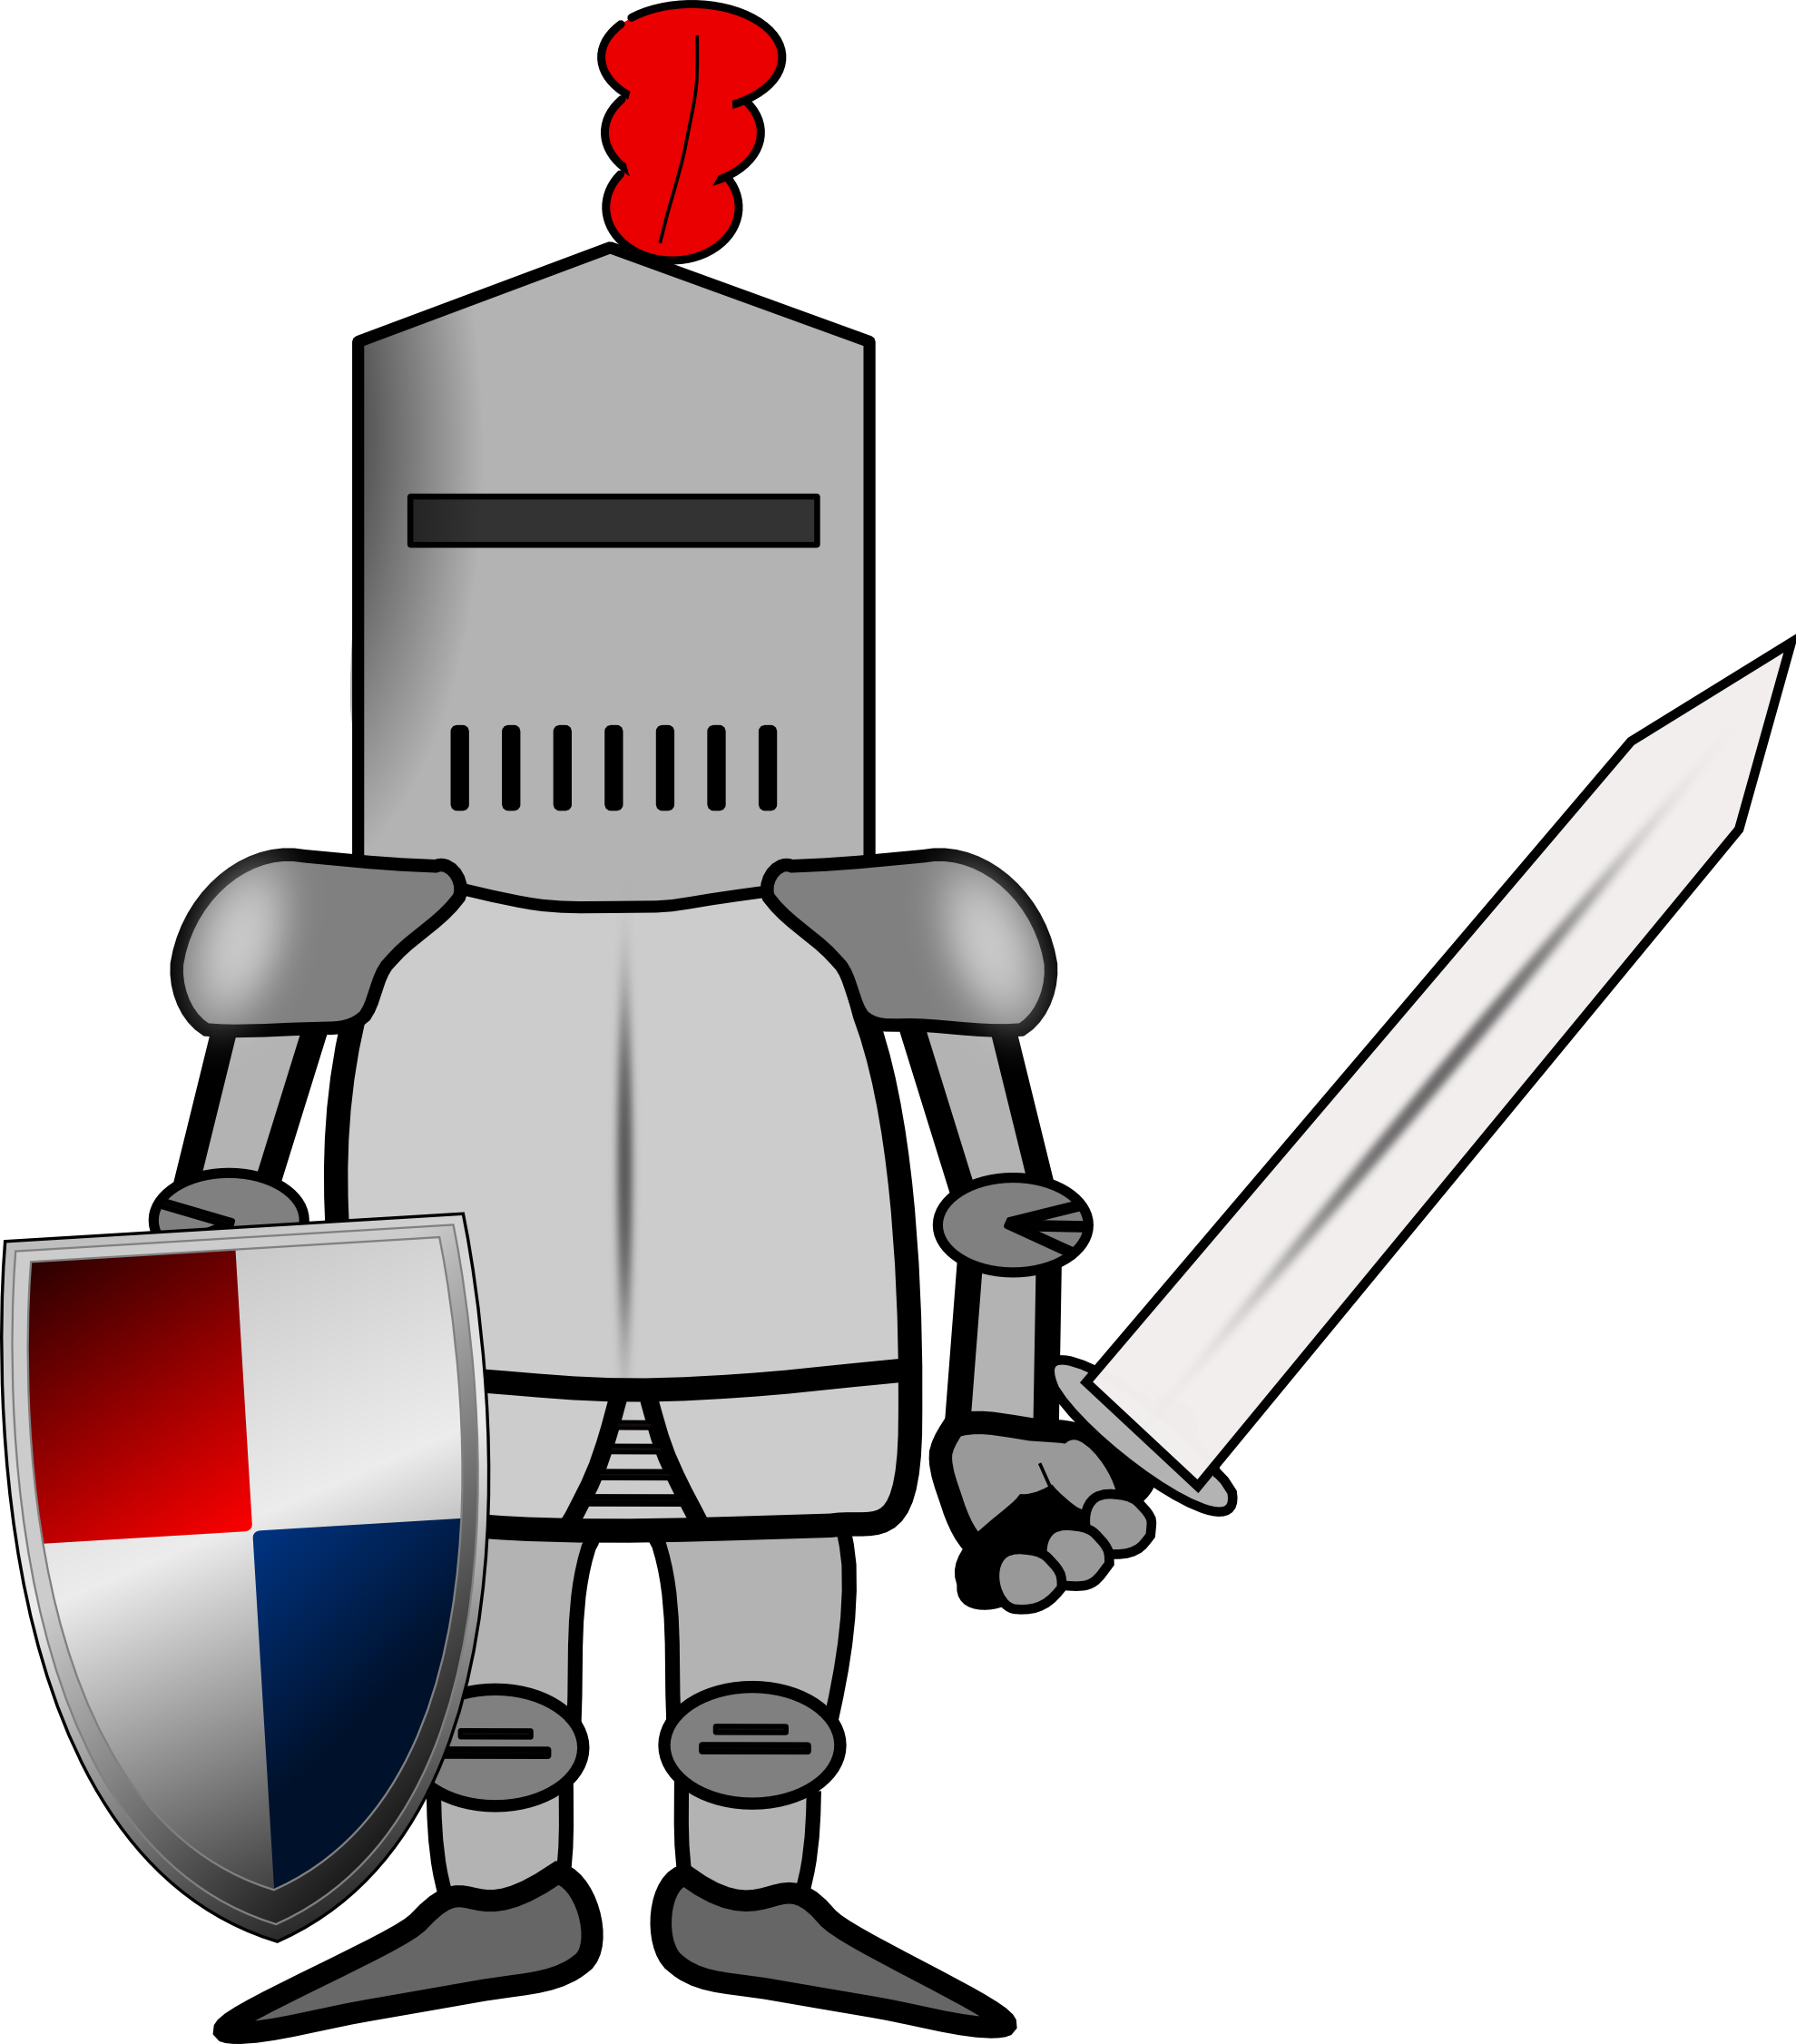 Knight Clip Art In Vector Or Eps Format Free ...